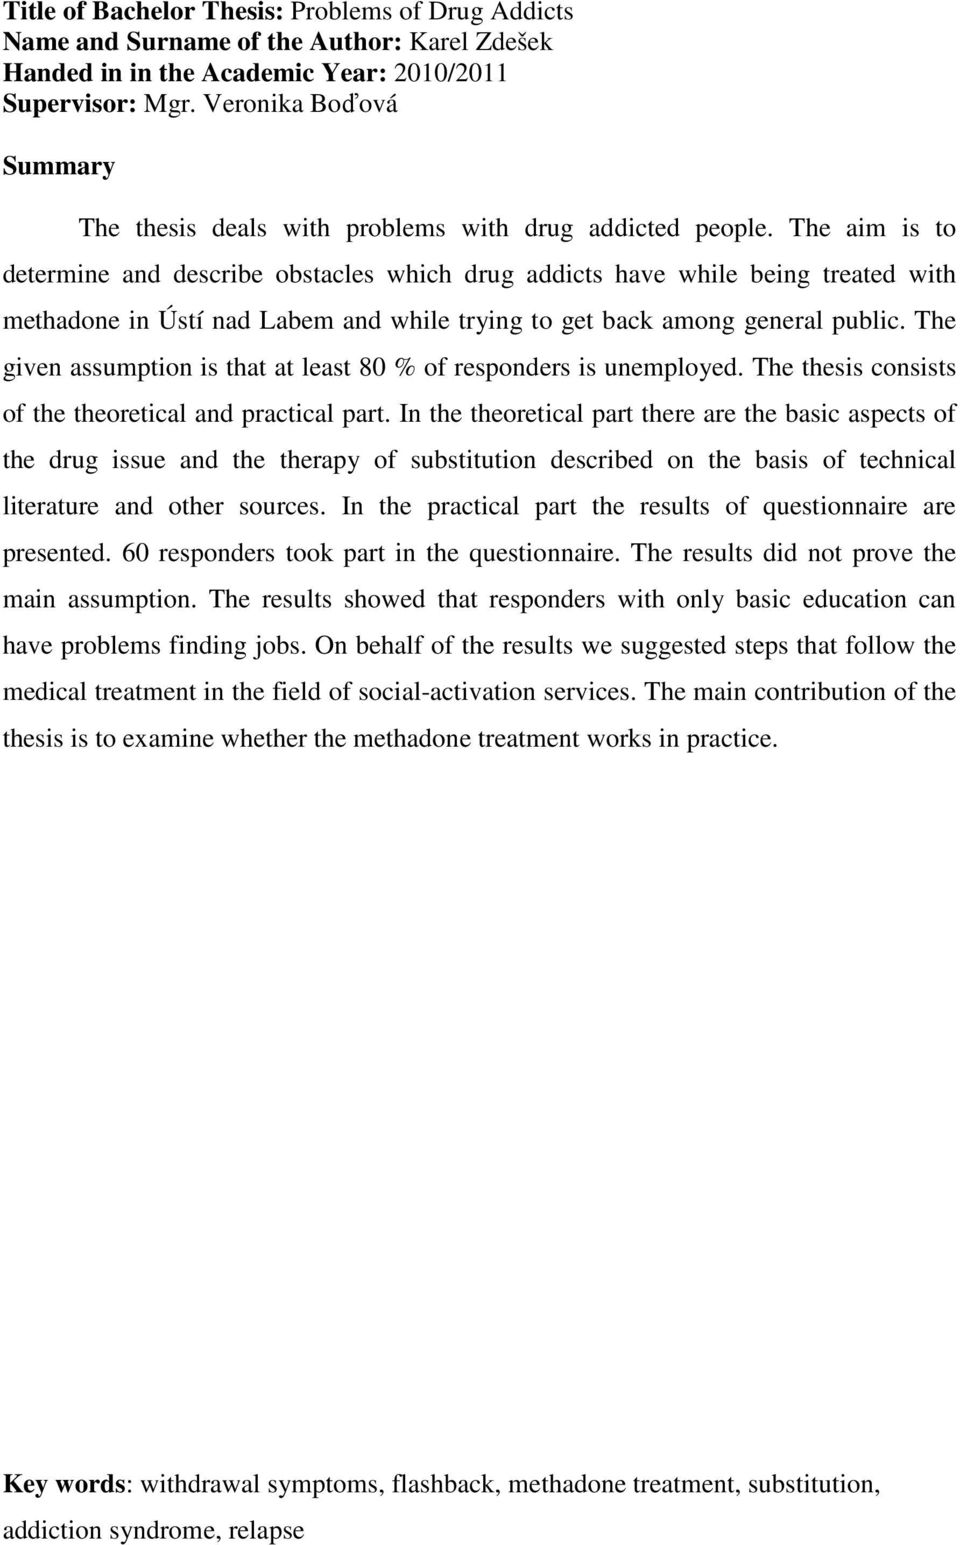 The aim is to determine and describe obstacles which drug addicts have while being treated with methadone in Ústí nad Labem and while trying to get back among general public.